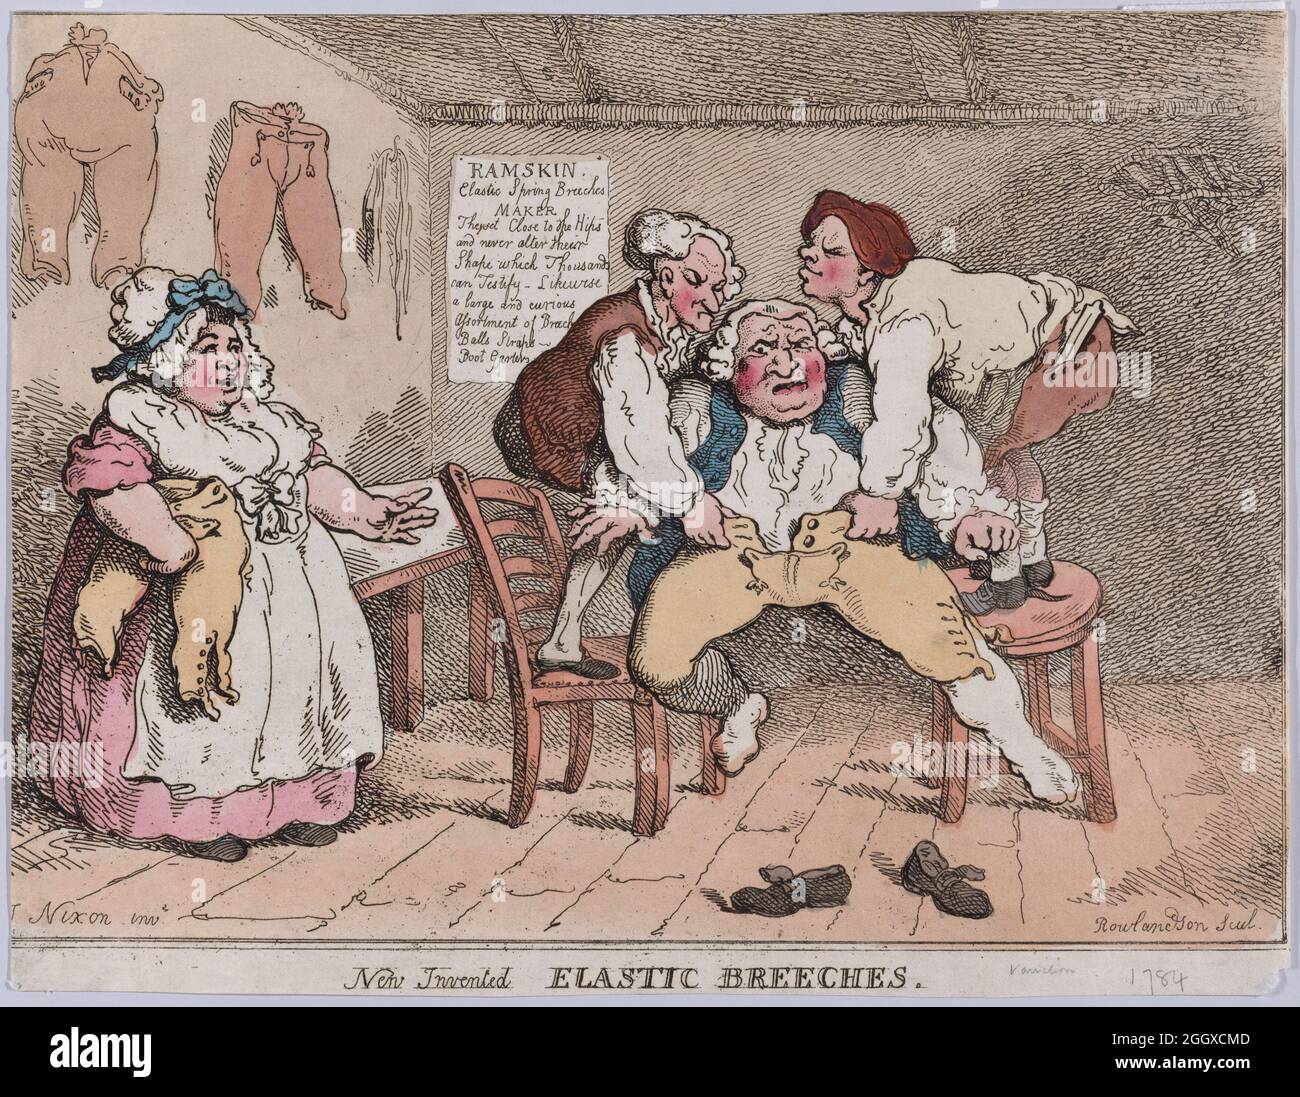 New Invented - Elastic Breeches 1812 Artist: Thomas Rowlandson (1756-1827) an English artist and caricaturist of the Georgian Era. A social observer, he was a prolific artist and print maker.  Credit: Levenson Collection/Alamy Stock Photo